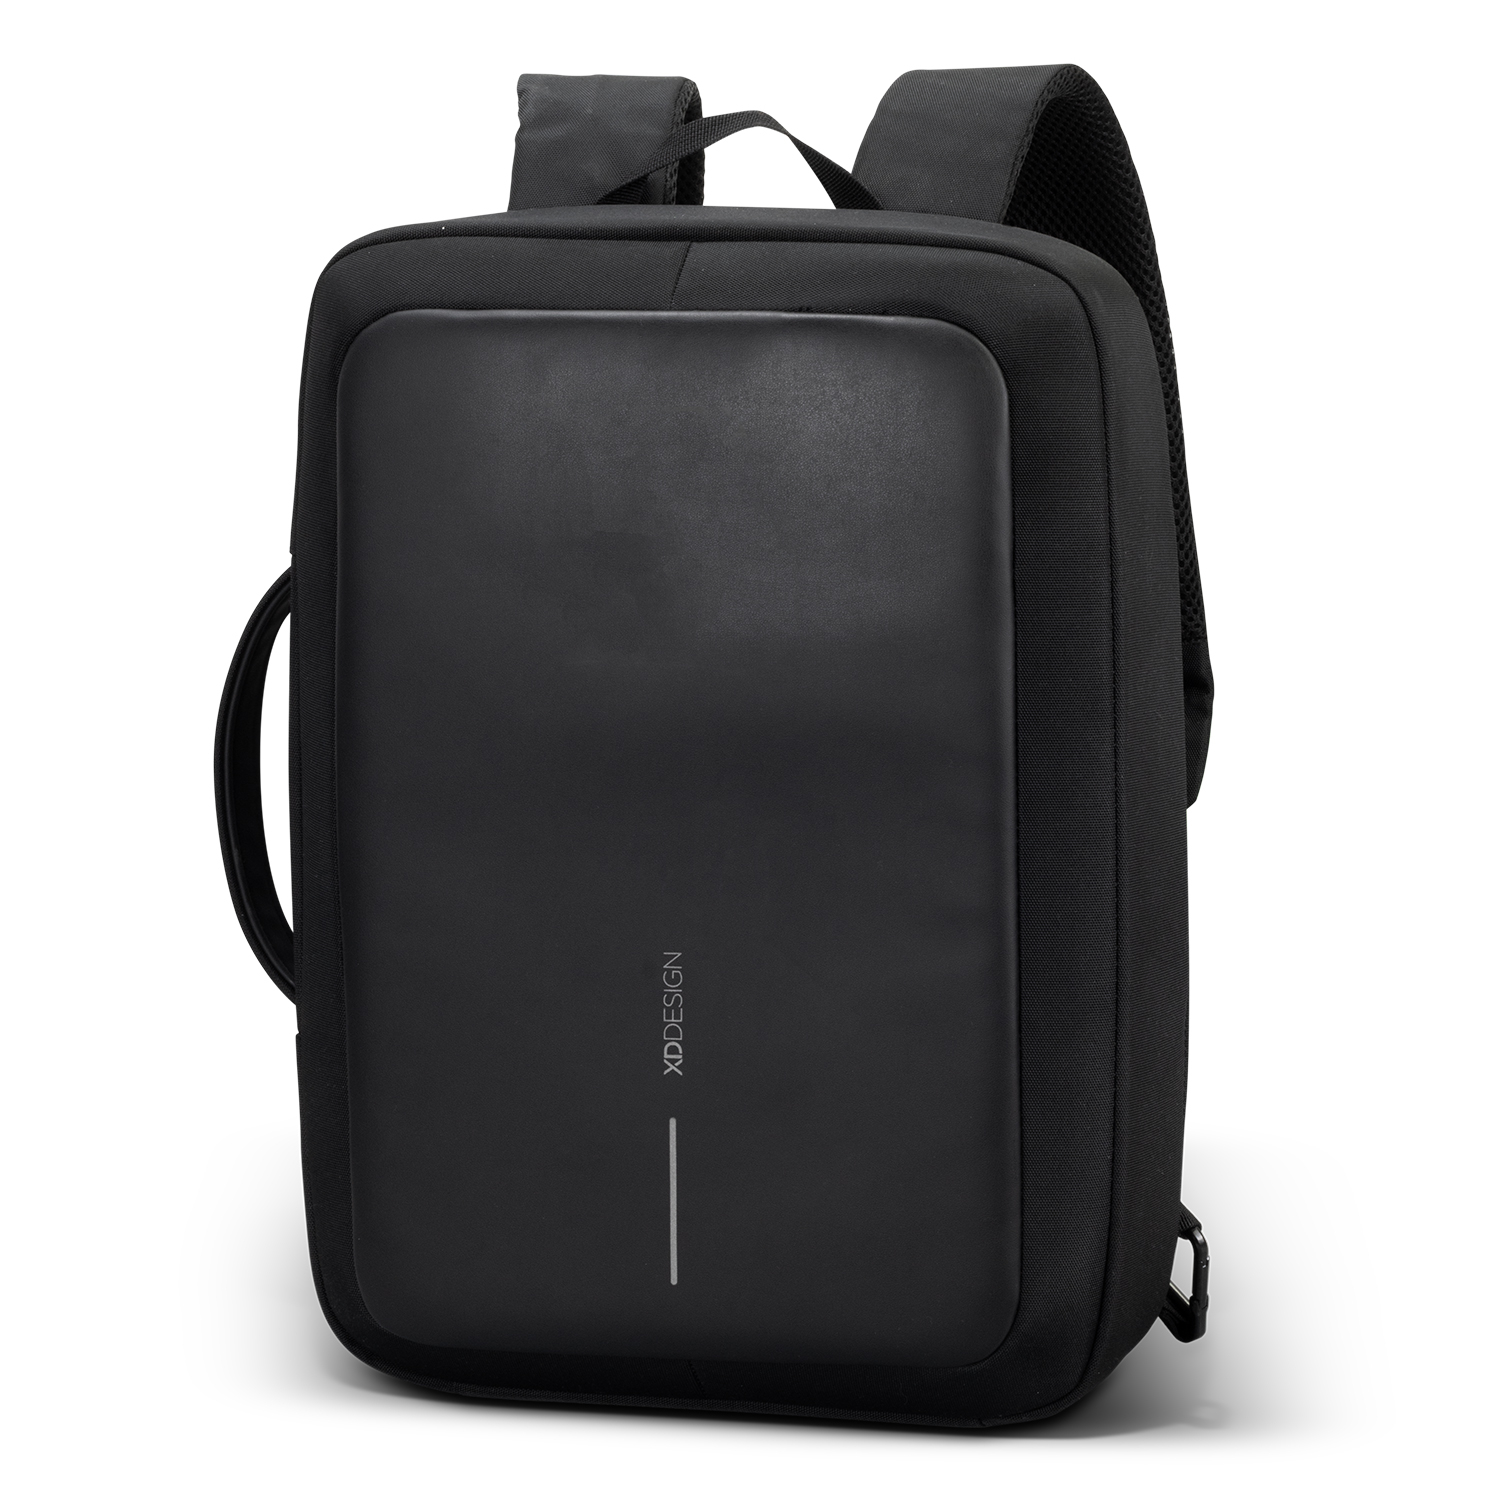 TRENDS | Bobby Bizz Anti-theft Backpack Briefcase